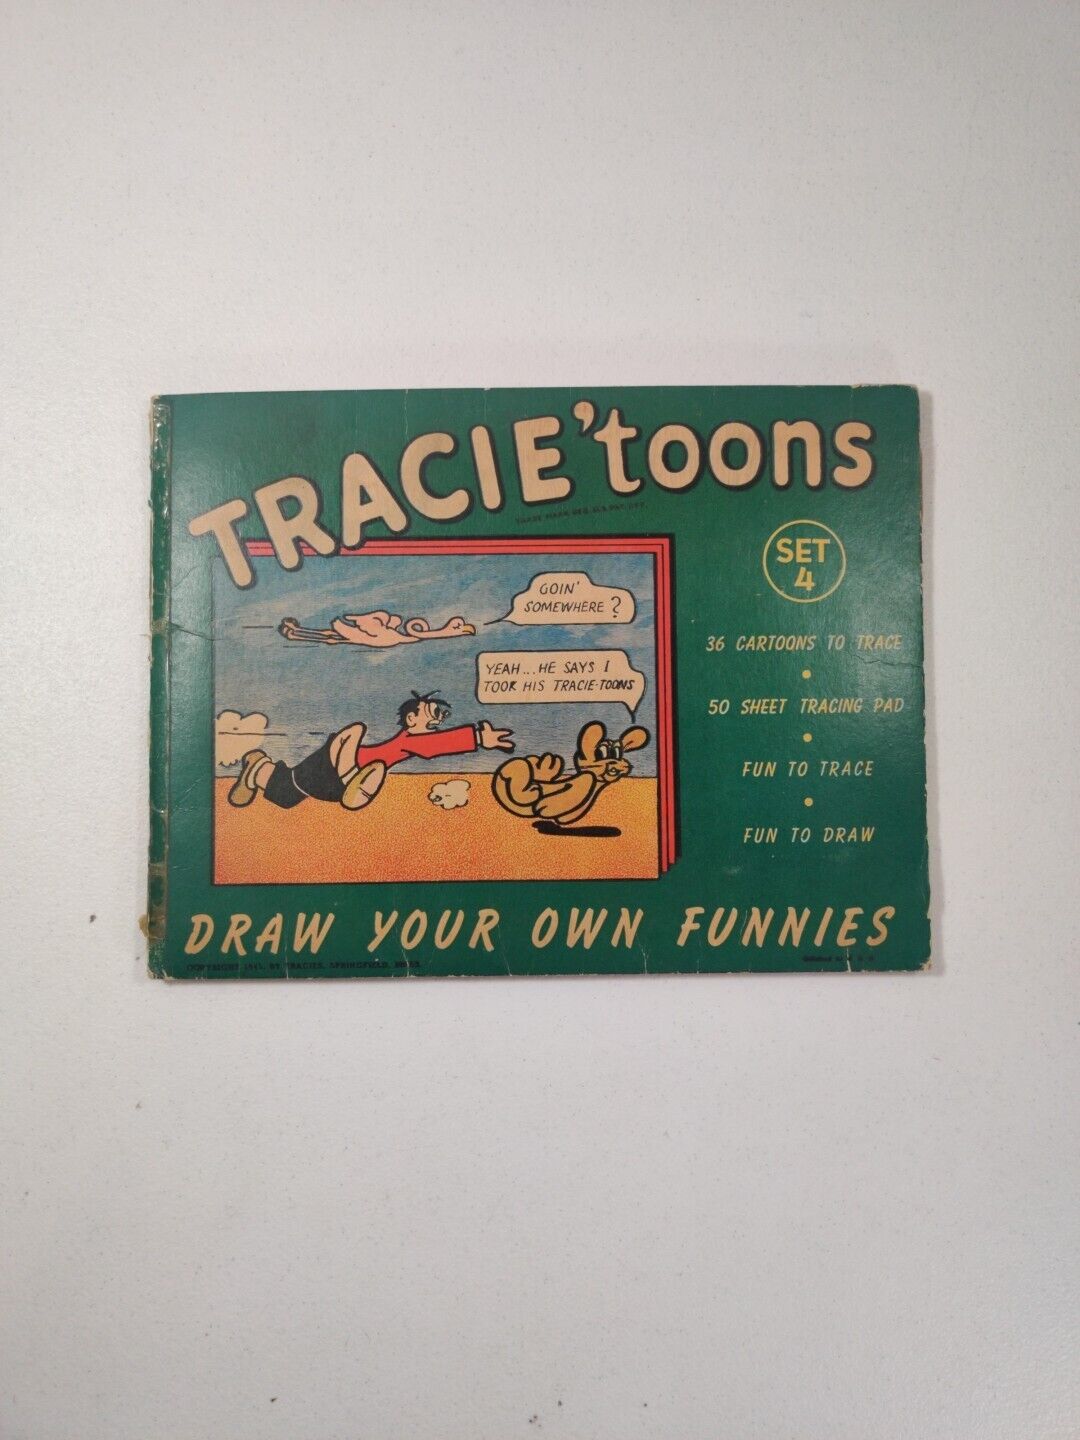 VINTAGE 1940s TRACIE 'TOONS DRAW YOUR OWN COMIC STRIP CARTOON FUNNIES KIT